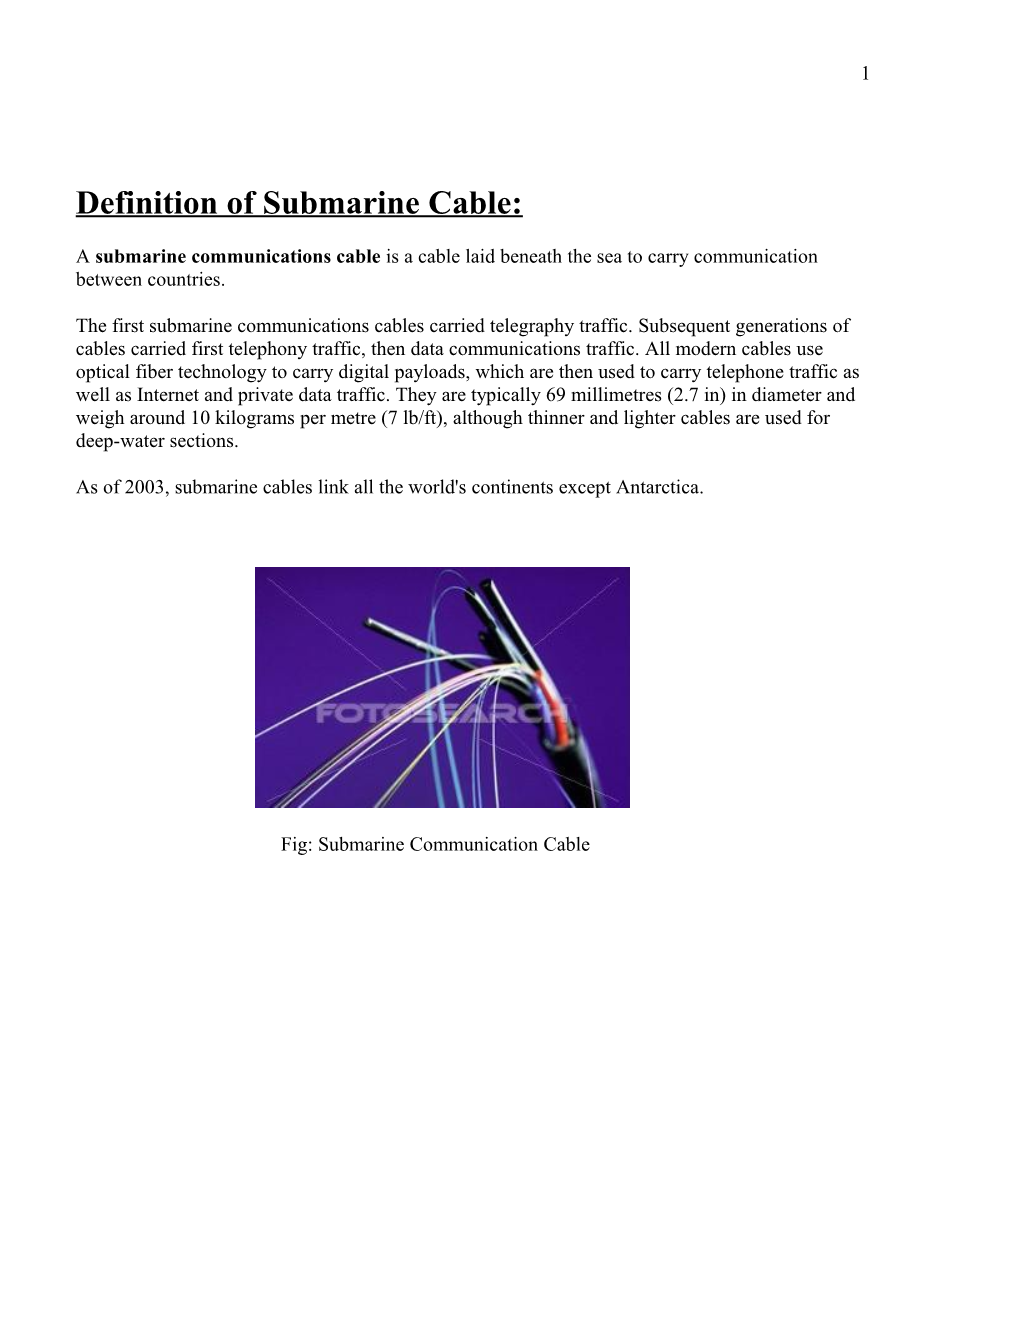 Definition of Submarine Cable